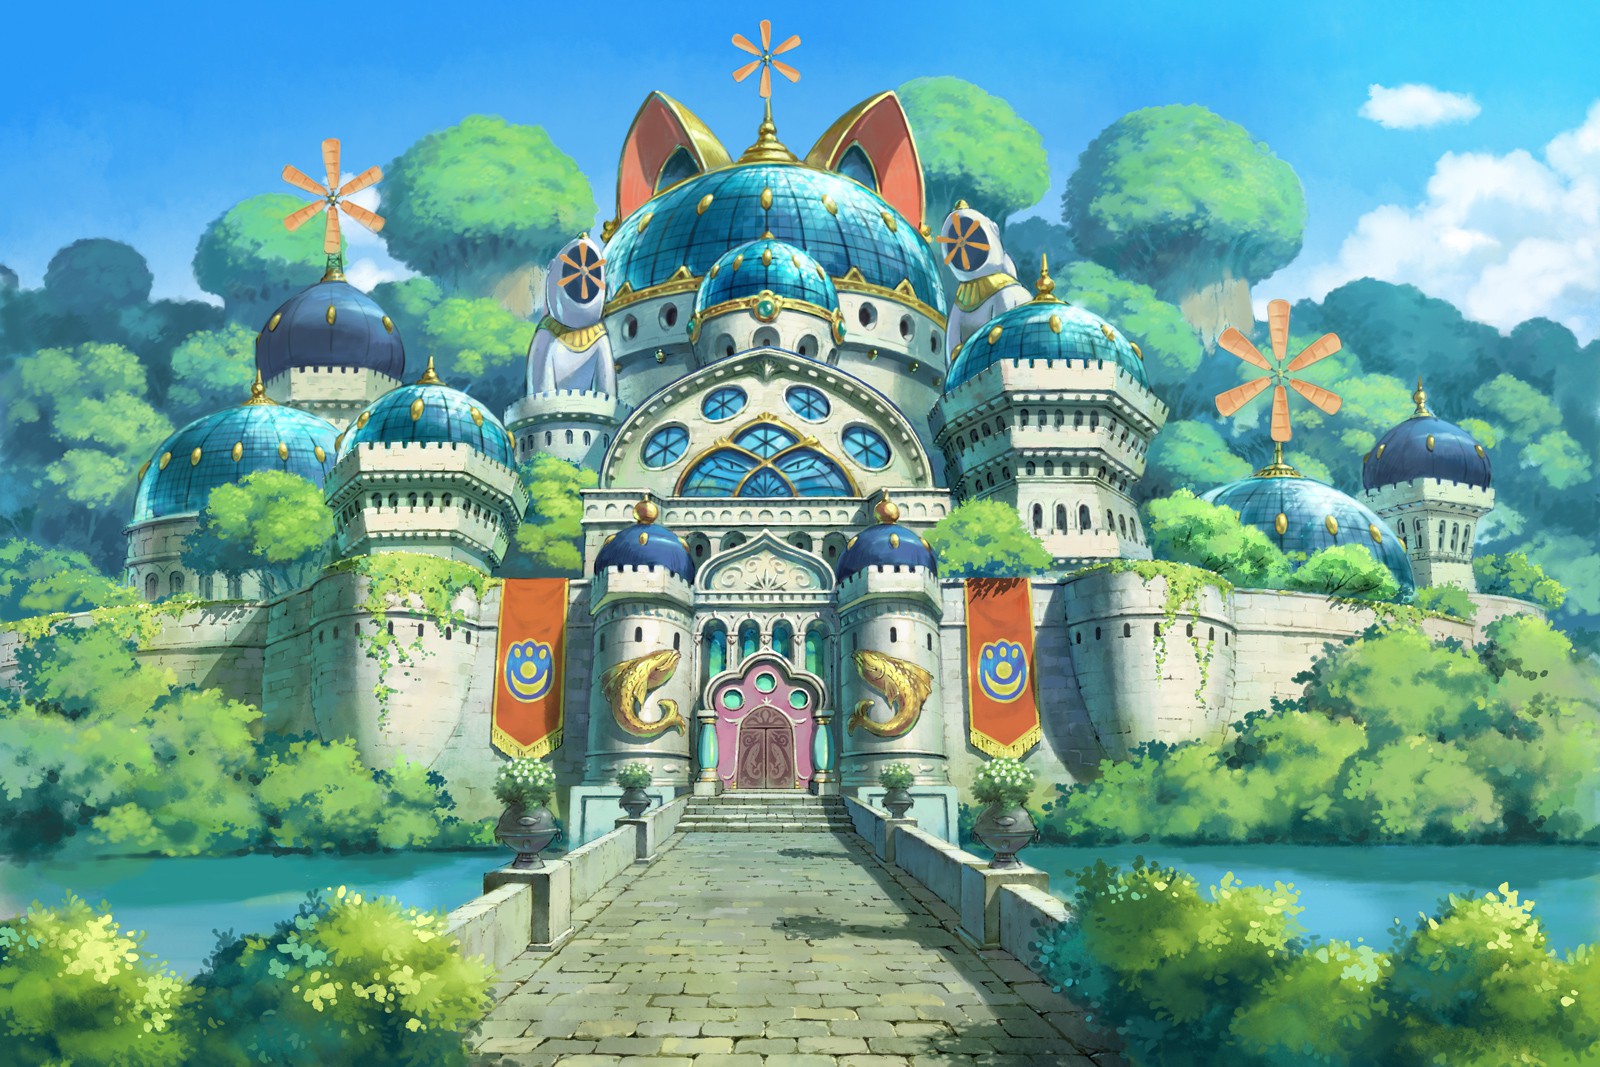 artwork-ding-dong-dell-ni-no-kuni-ii-level-5-cook-and-becker